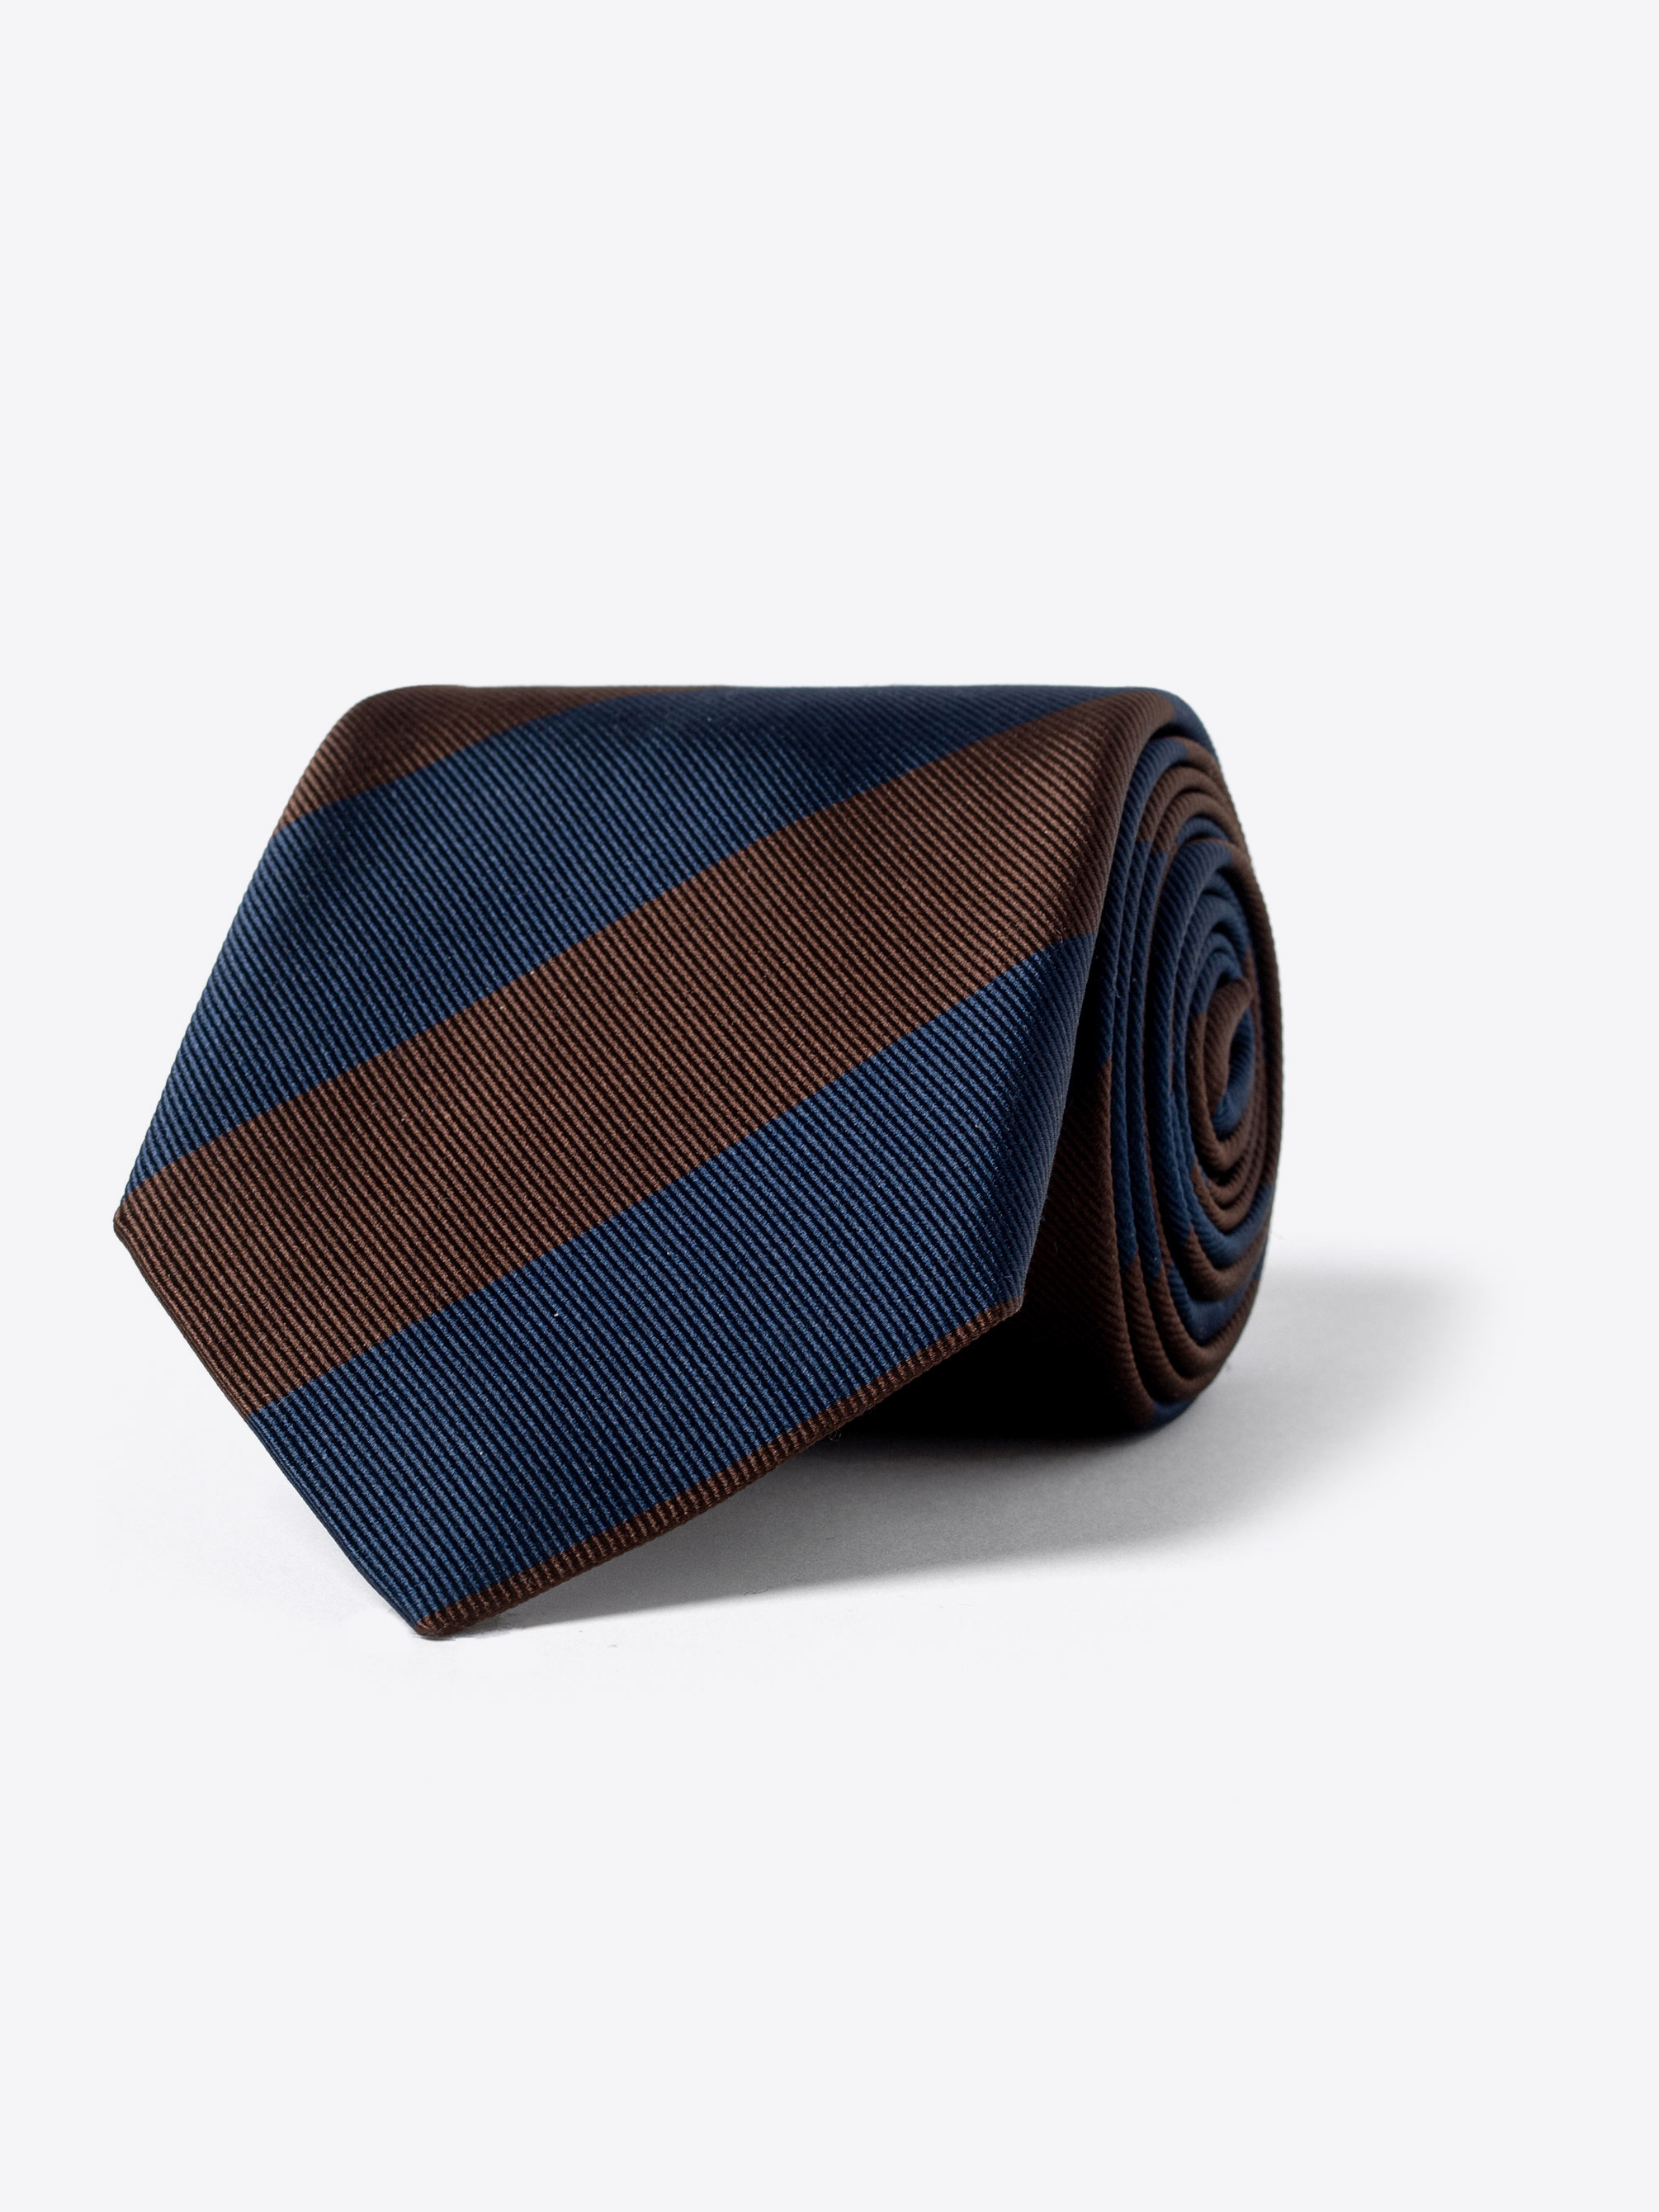 Zoom Image of Navy and Brown Stripe Repp Silk Tie